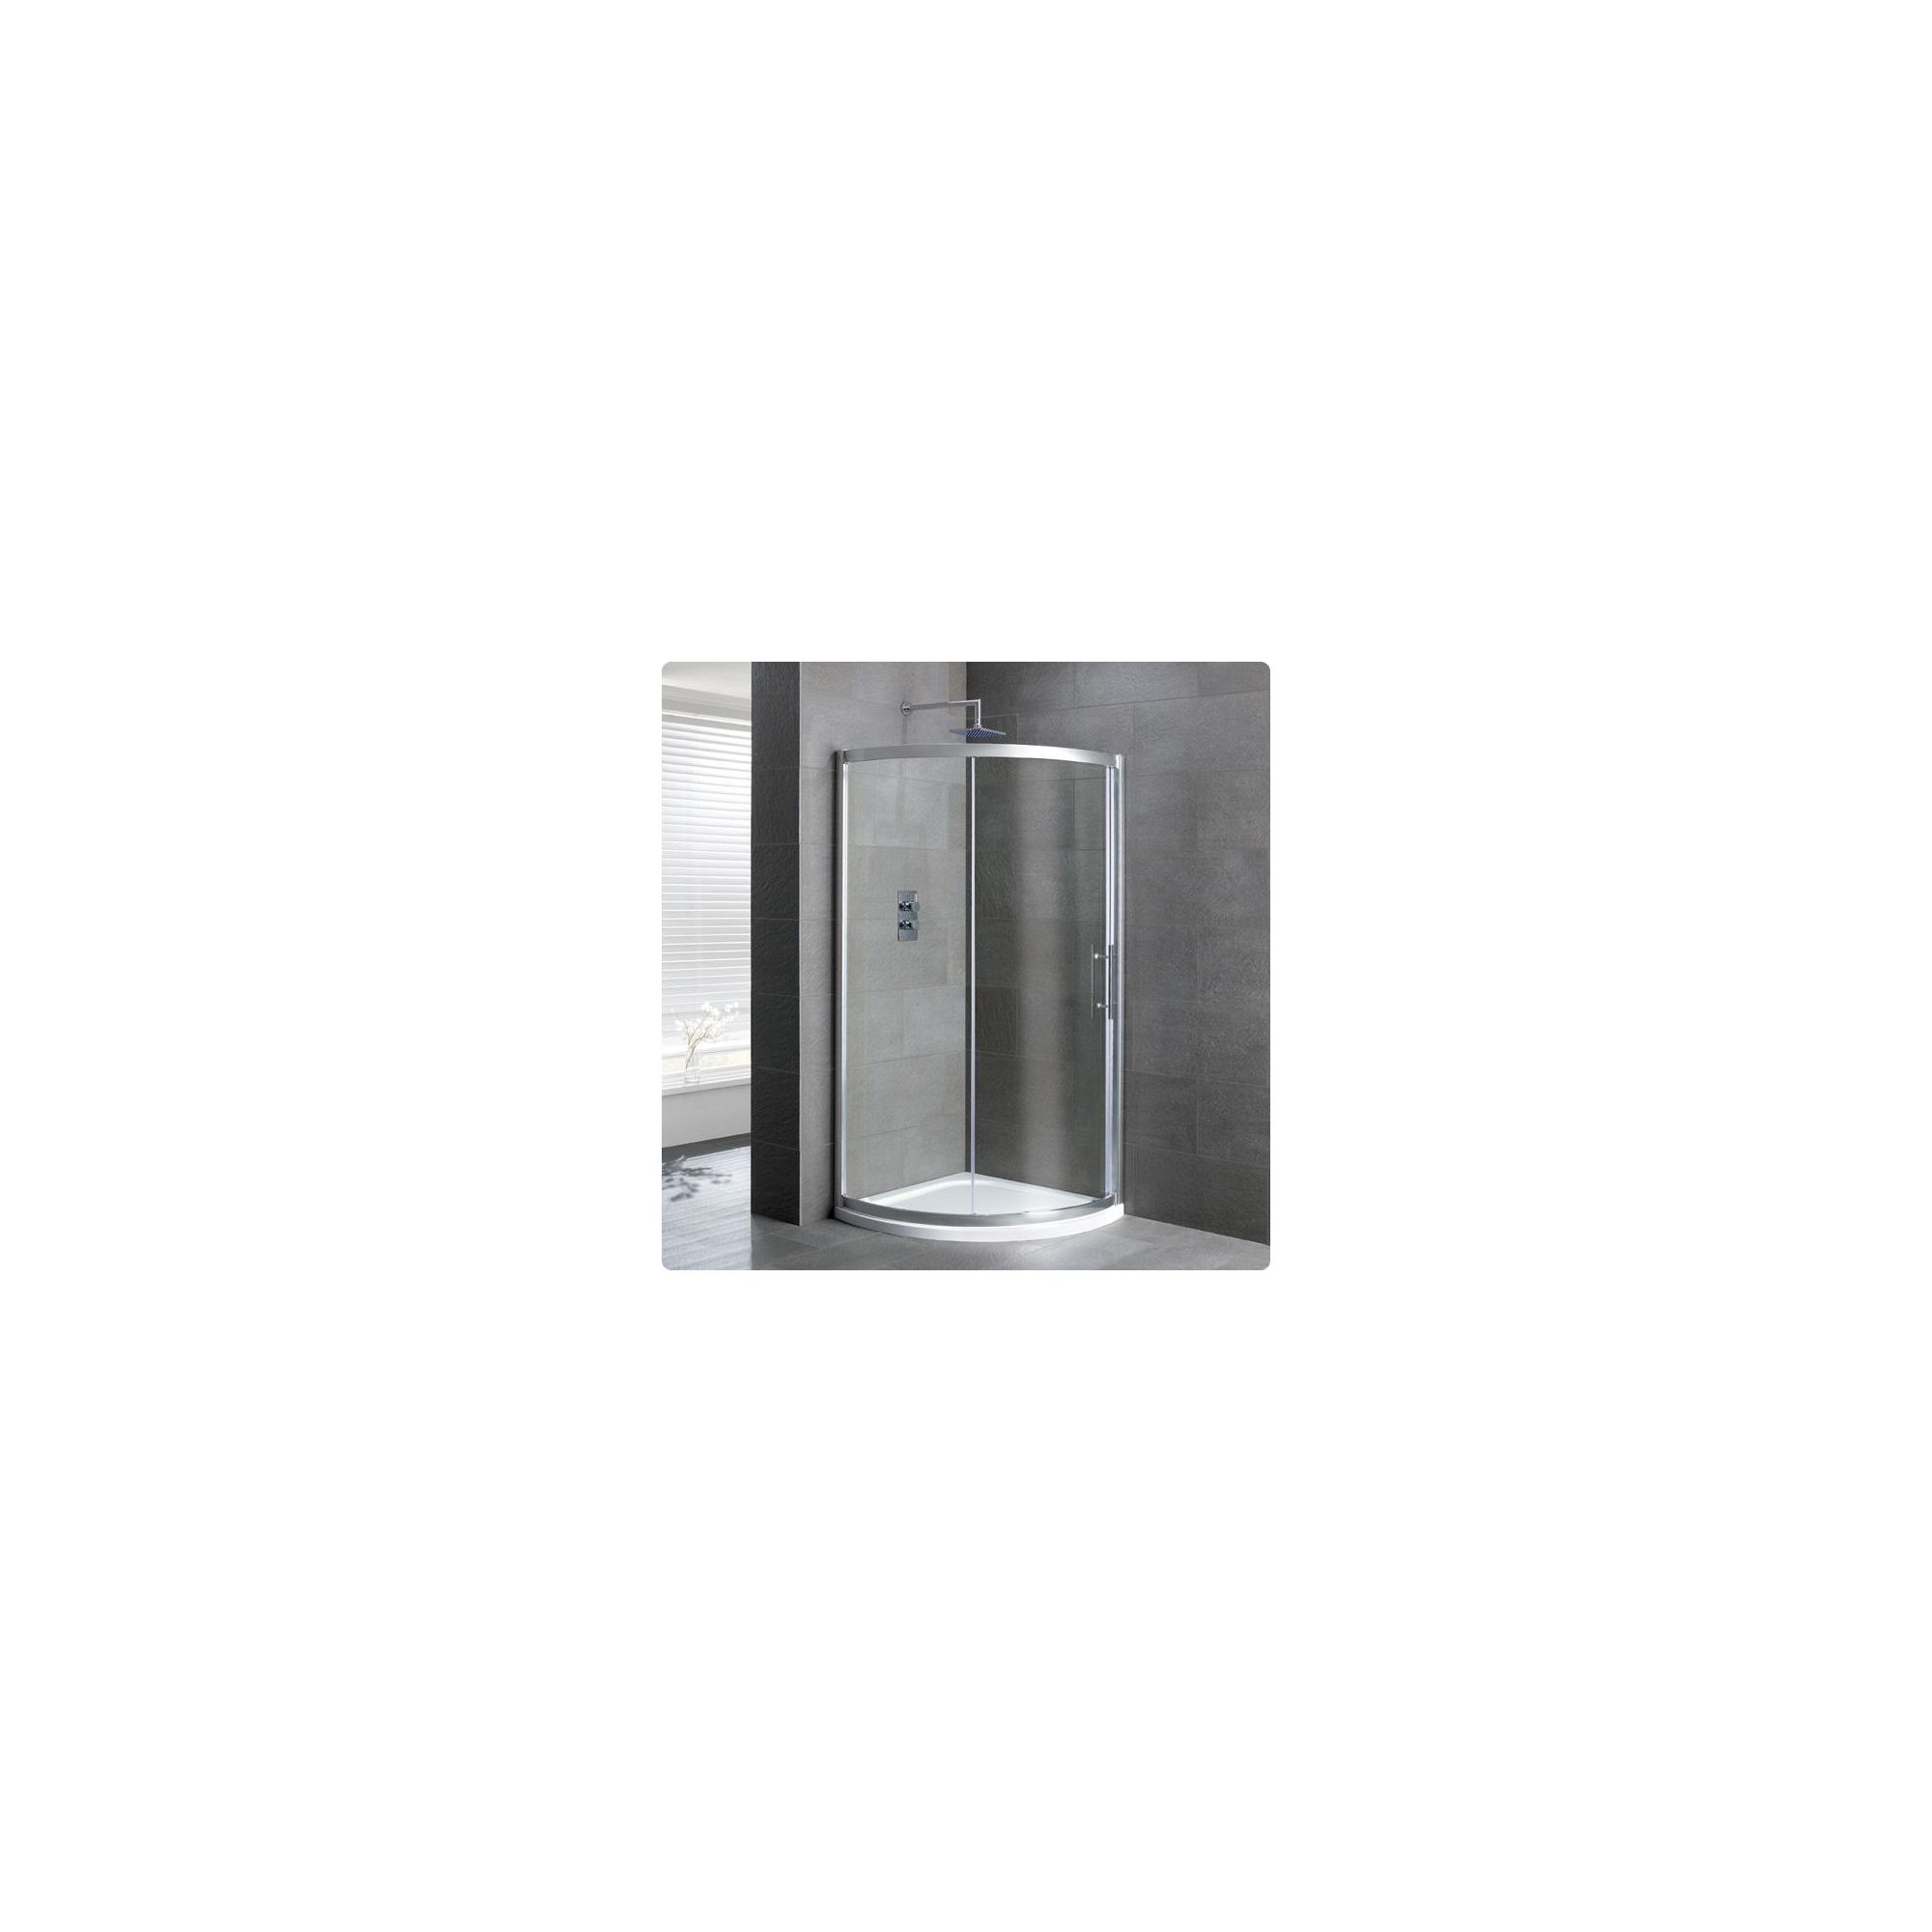 Duchy Select Silver 1 Door Quadrant Shower Enclosure 1000mm, Standard Tray, 6mm Glass at Tesco Direct